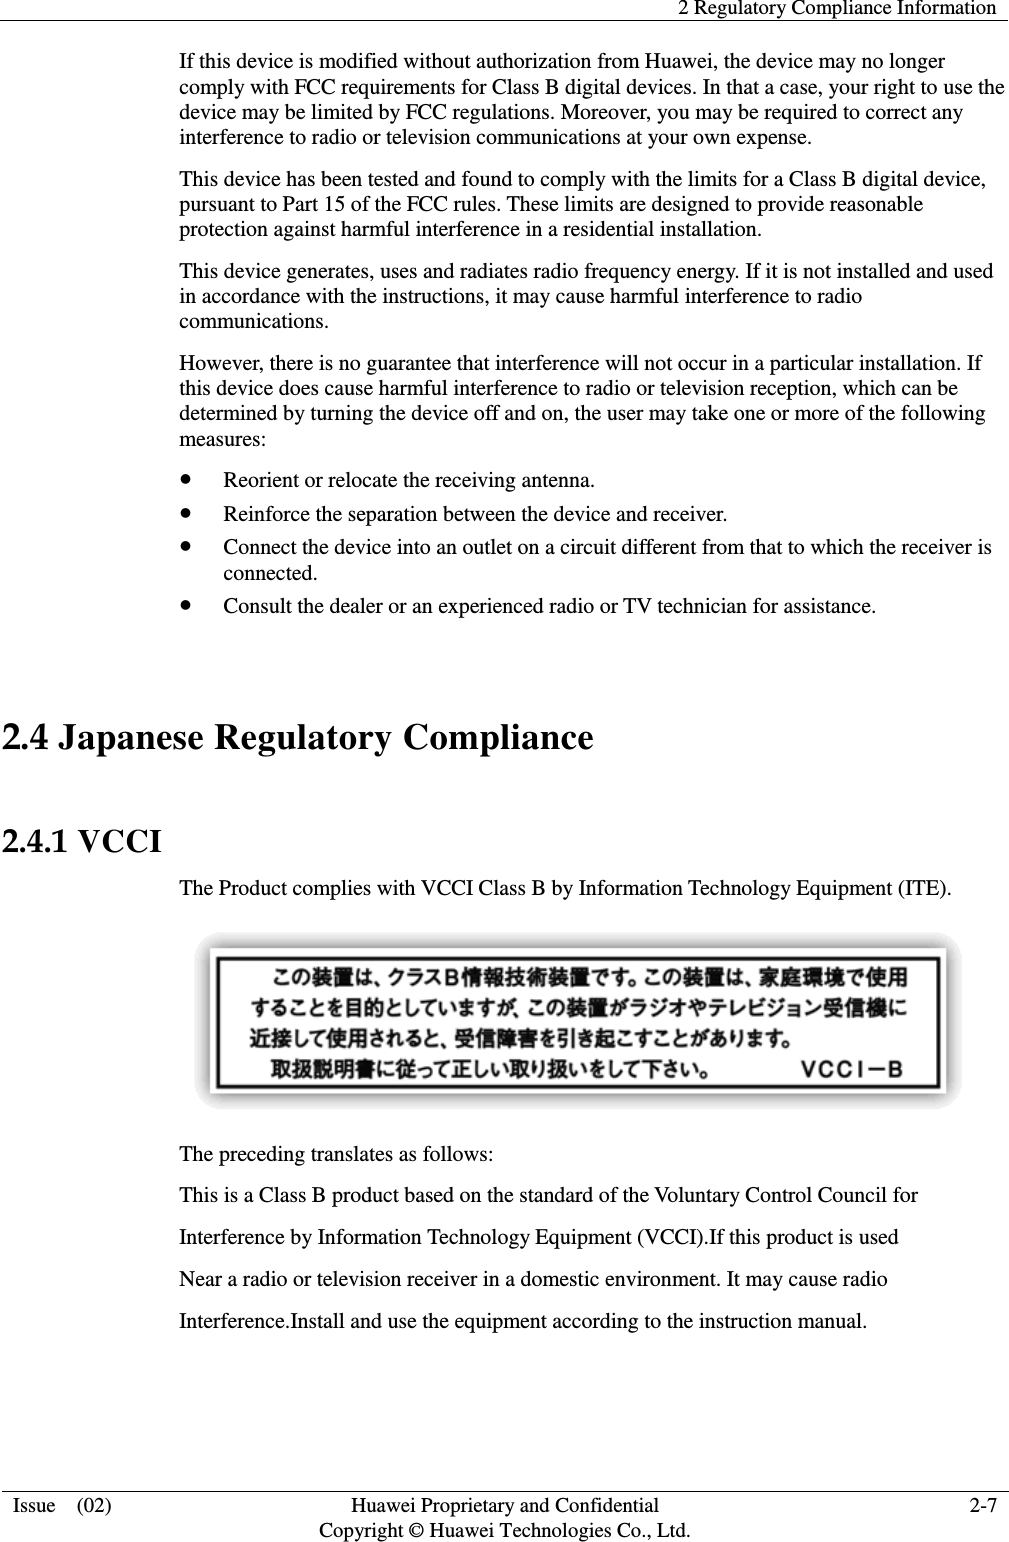   2 Regulatory Compliance Information  Issue    (02) Huawei Proprietary and Confidential         Copyright © Huawei Technologies Co., Ltd. 2-7  If this device is modified without authorization from Huawei, the device may no longer comply with FCC requirements for Class B digital devices. In that a case, your right to use the device may be limited by FCC regulations. Moreover, you may be required to correct any interference to radio or television communications at your own expense. This device has been tested and found to comply with the limits for a Class B digital device, pursuant to Part 15 of the FCC rules. These limits are designed to provide reasonable protection against harmful interference in a residential installation. This device generates, uses and radiates radio frequency energy. If it is not installed and used in accordance with the instructions, it may cause harmful interference to radio communications. However, there is no guarantee that interference will not occur in a particular installation. If this device does cause harmful interference to radio or television reception, which can be determined by turning the device off and on, the user may take one or more of the following measures:  Reorient or relocate the receiving antenna.  Reinforce the separation between the device and receiver.  Connect the device into an outlet on a circuit different from that to which the receiver is connected.  Consult the dealer or an experienced radio or TV technician for assistance.  2.4 Japanese Regulatory Compliance  2.4.1 VCCI The Product complies with VCCI Class B by Information Technology Equipment (ITE).  The preceding translates as follows: This is a Class B product based on the standard of the Voluntary Control Council for Interference by Information Technology Equipment (VCCI).If this product is used Near a radio or television receiver in a domestic environment. It may cause radio Interference.Install and use the equipment according to the instruction manual.   